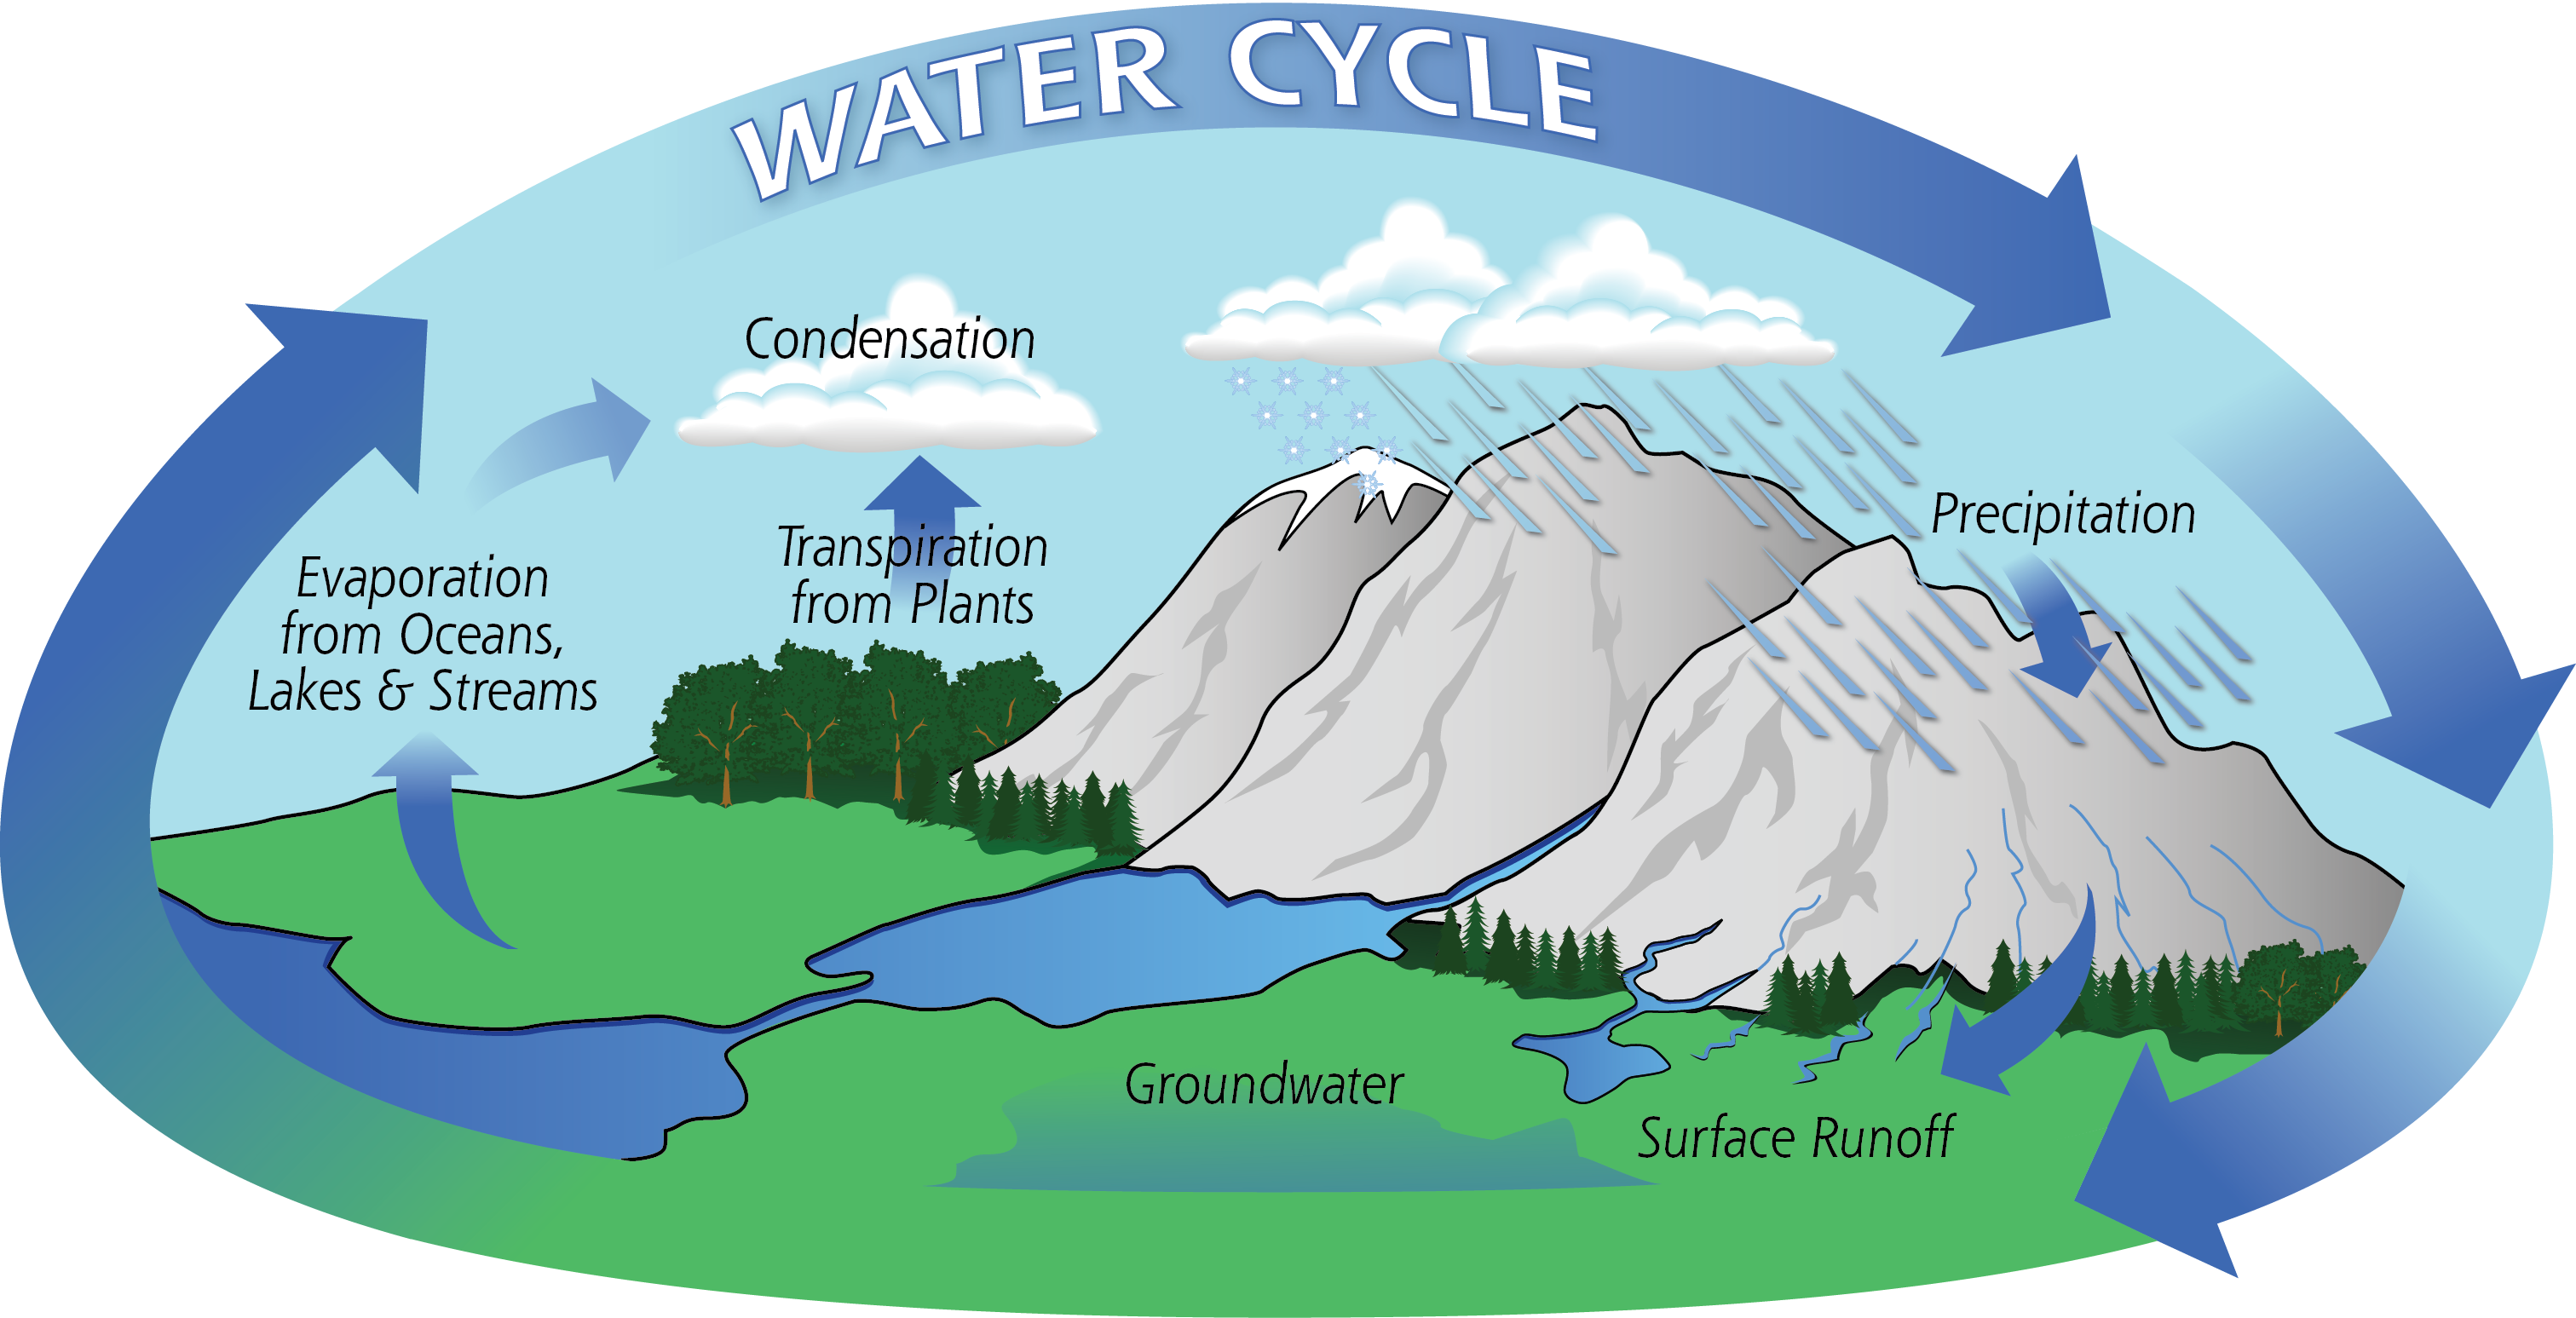 DRAW A WELL LABELLED DIAGRAM OF THE WATER CYCLE - ATIKA SCHOOL